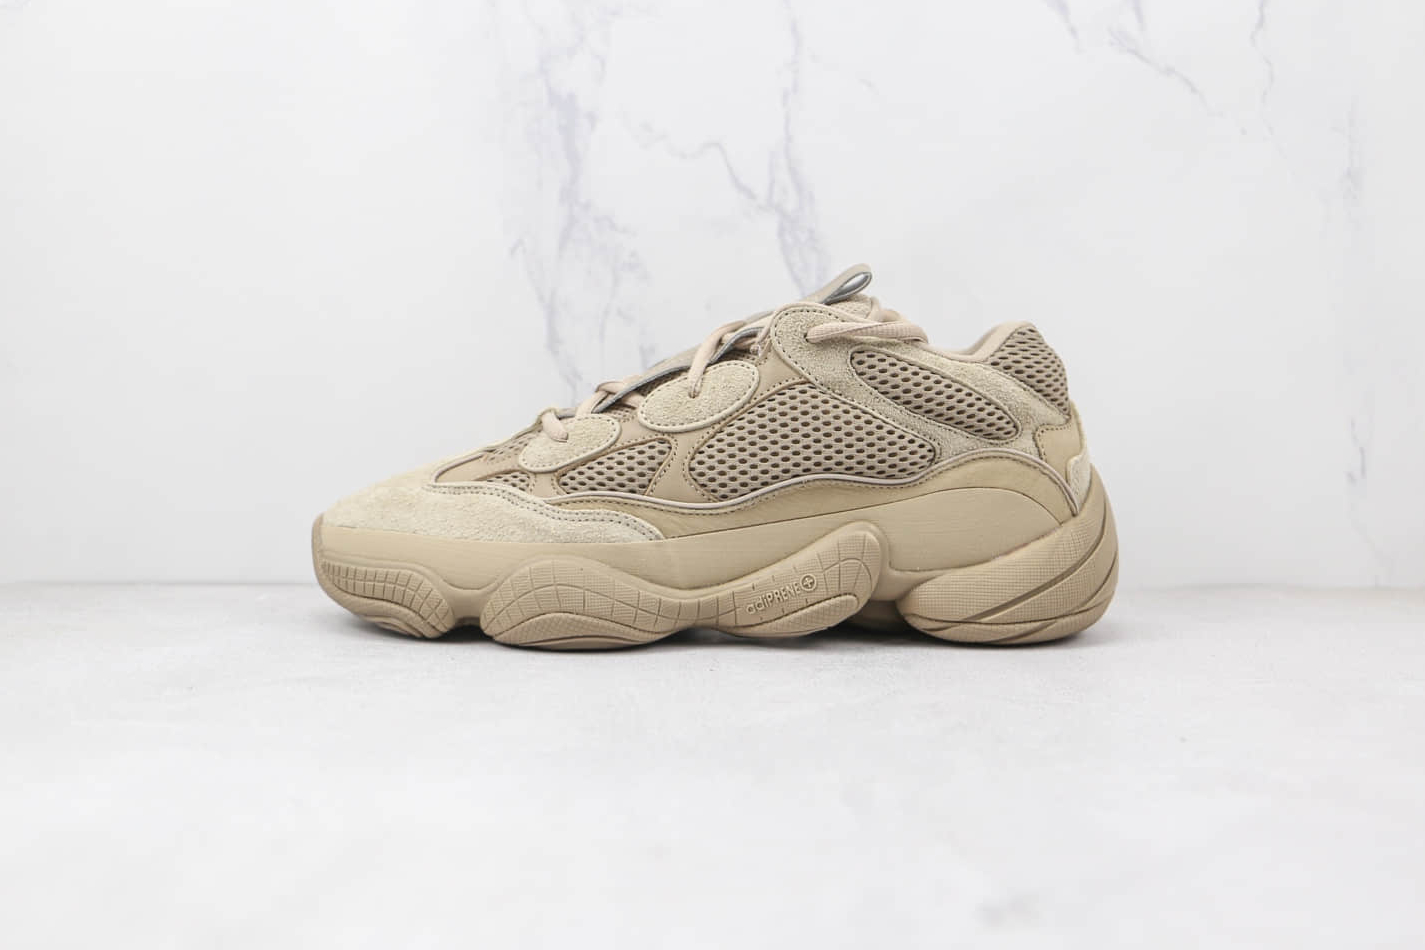 Adidas Yeezy 500 'Taupe Light' GX3605 - The Perfect Blend of Style and Comfort